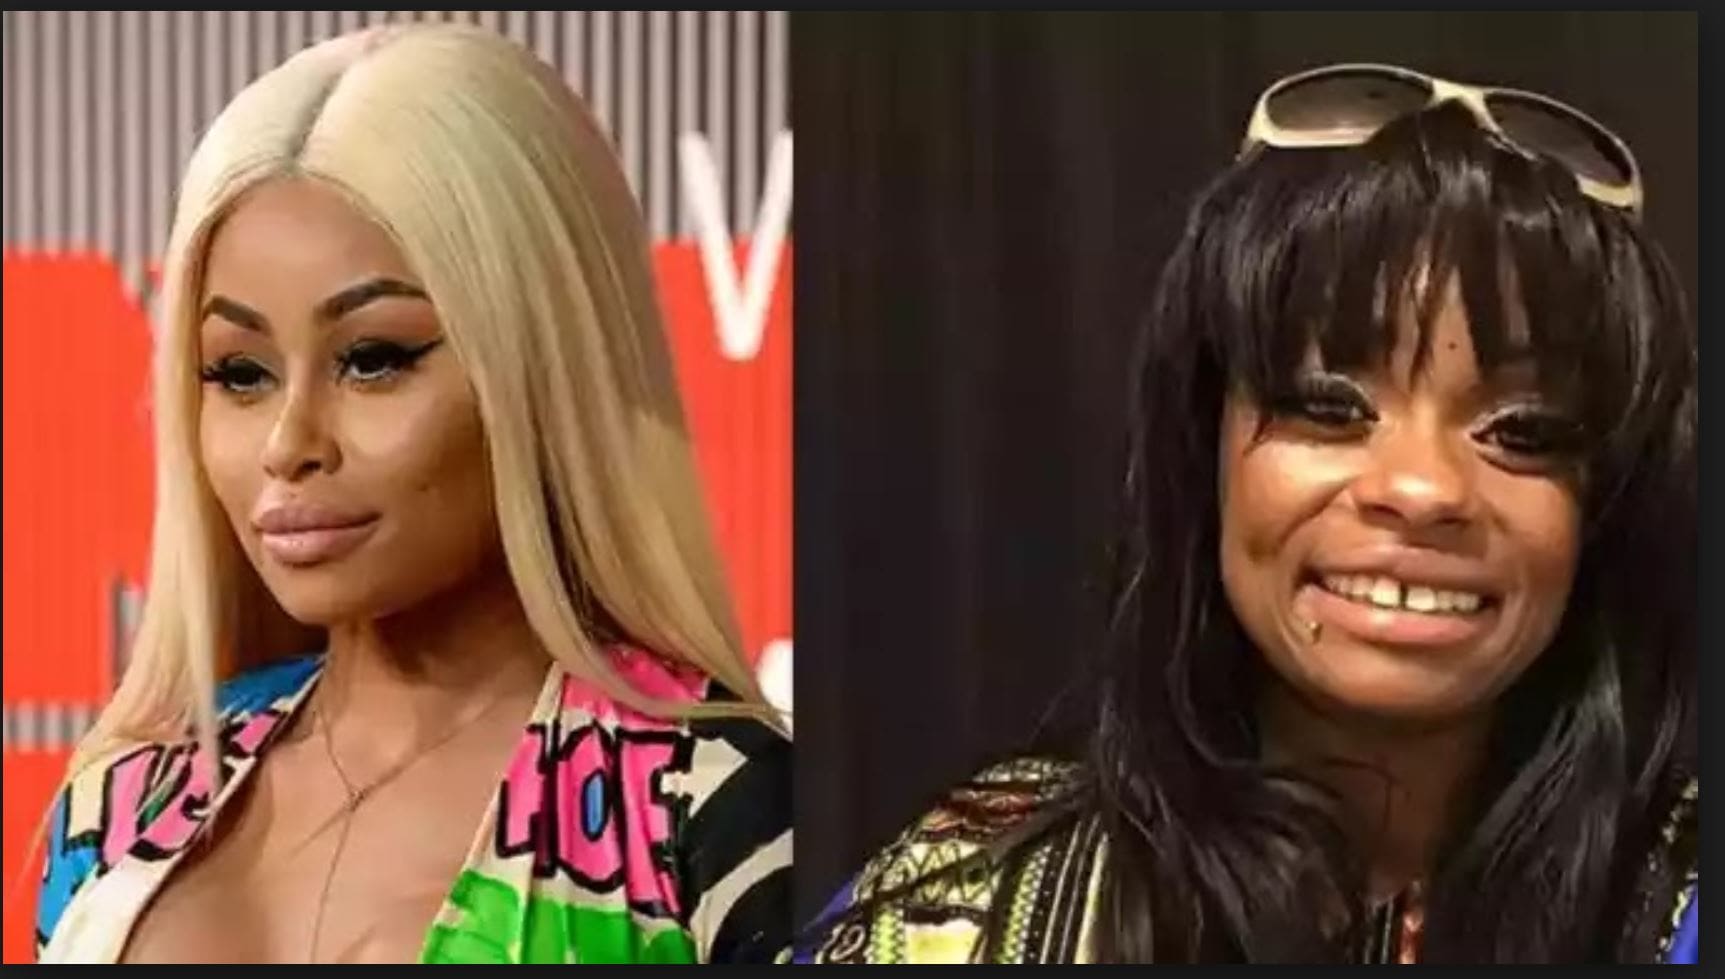 Blac Chyna Shows Off Her New 3 Million Dollar Mansion Following The Kid Buu Breakup - Fans Tell Her To Invite Her Mom, Tokyo Toni Over